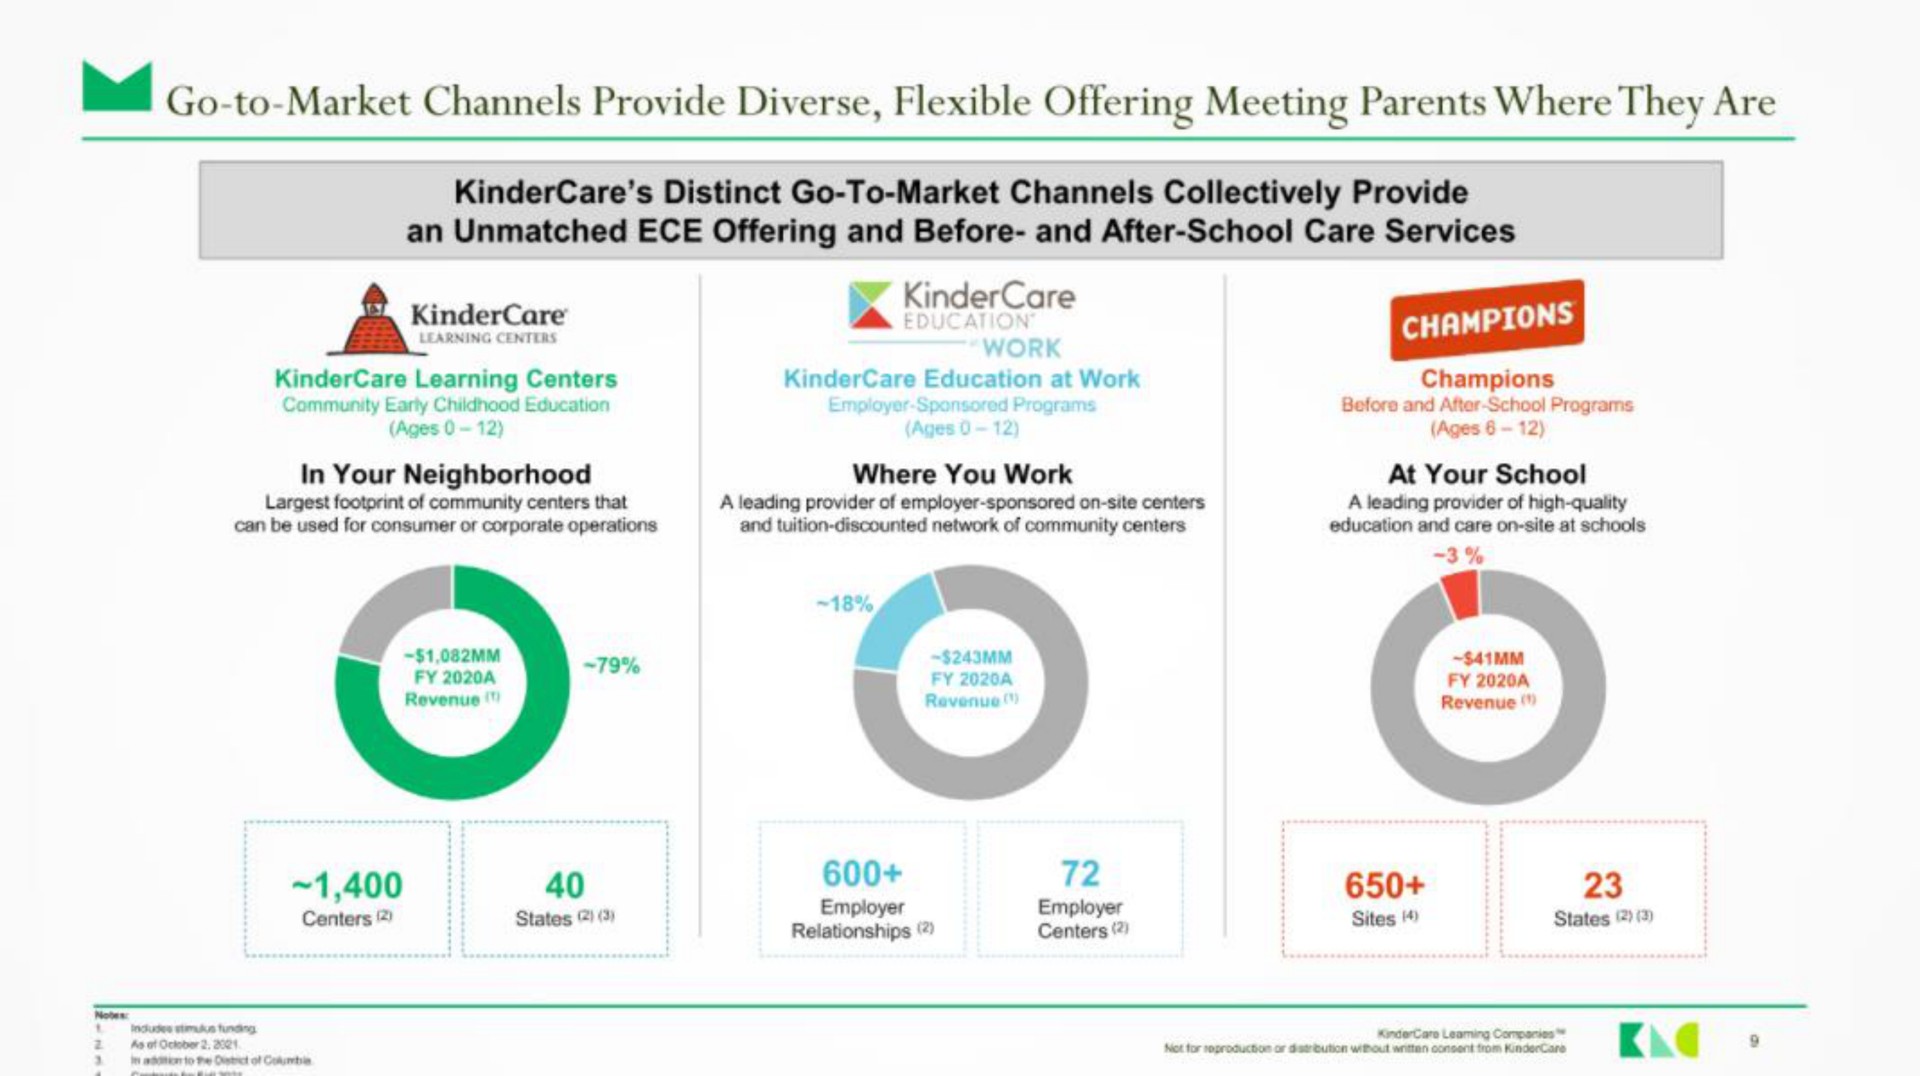 is go to market channels provide diverse flexible offering meeting parents where they are distinct go to market channels collectively provide | KinderCare